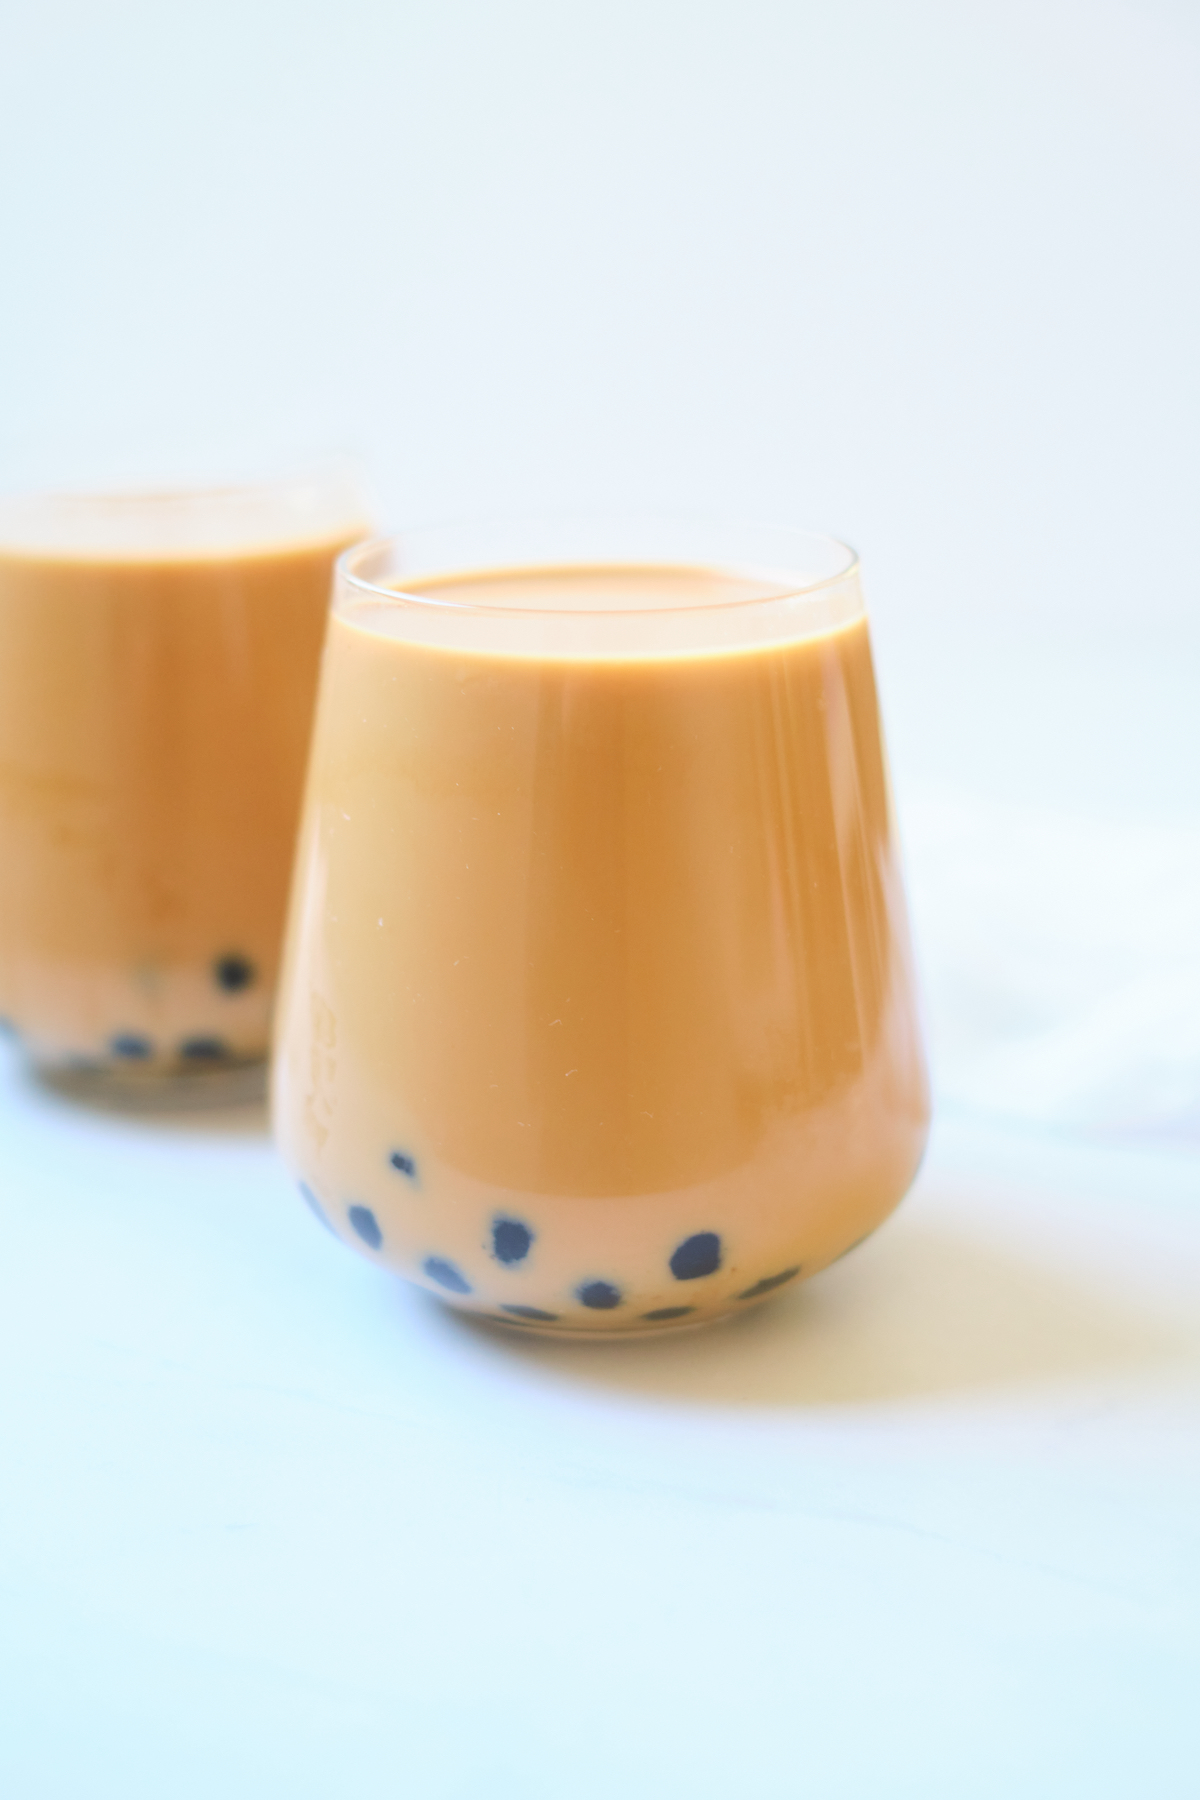 the completed iced boba coffee recipe